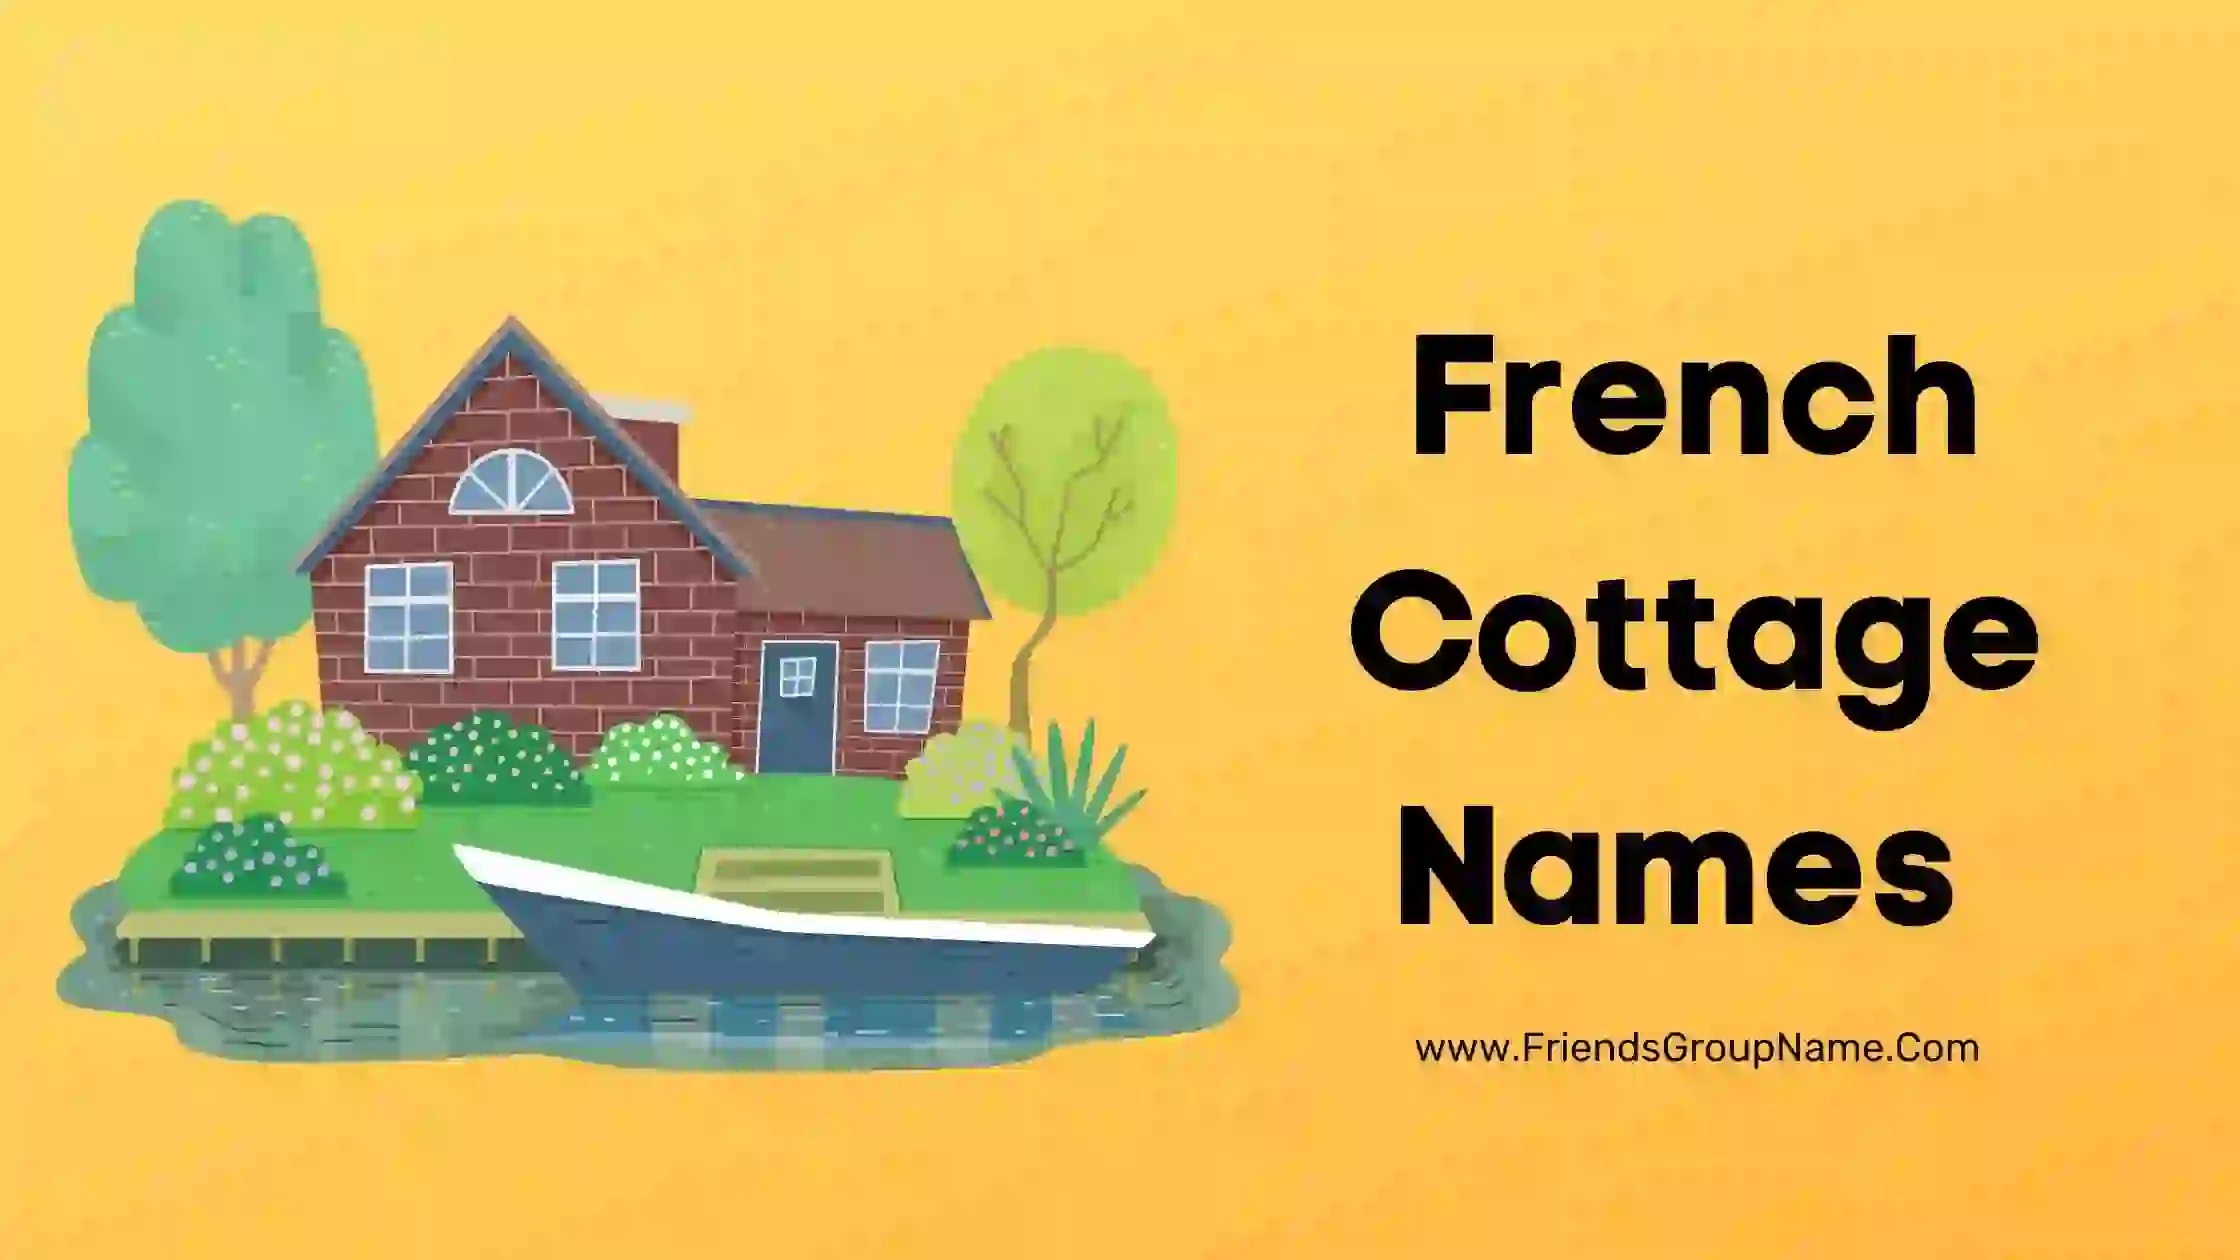 French Cottage Names【2023】Cool, Best & Funny French House Names Ideas